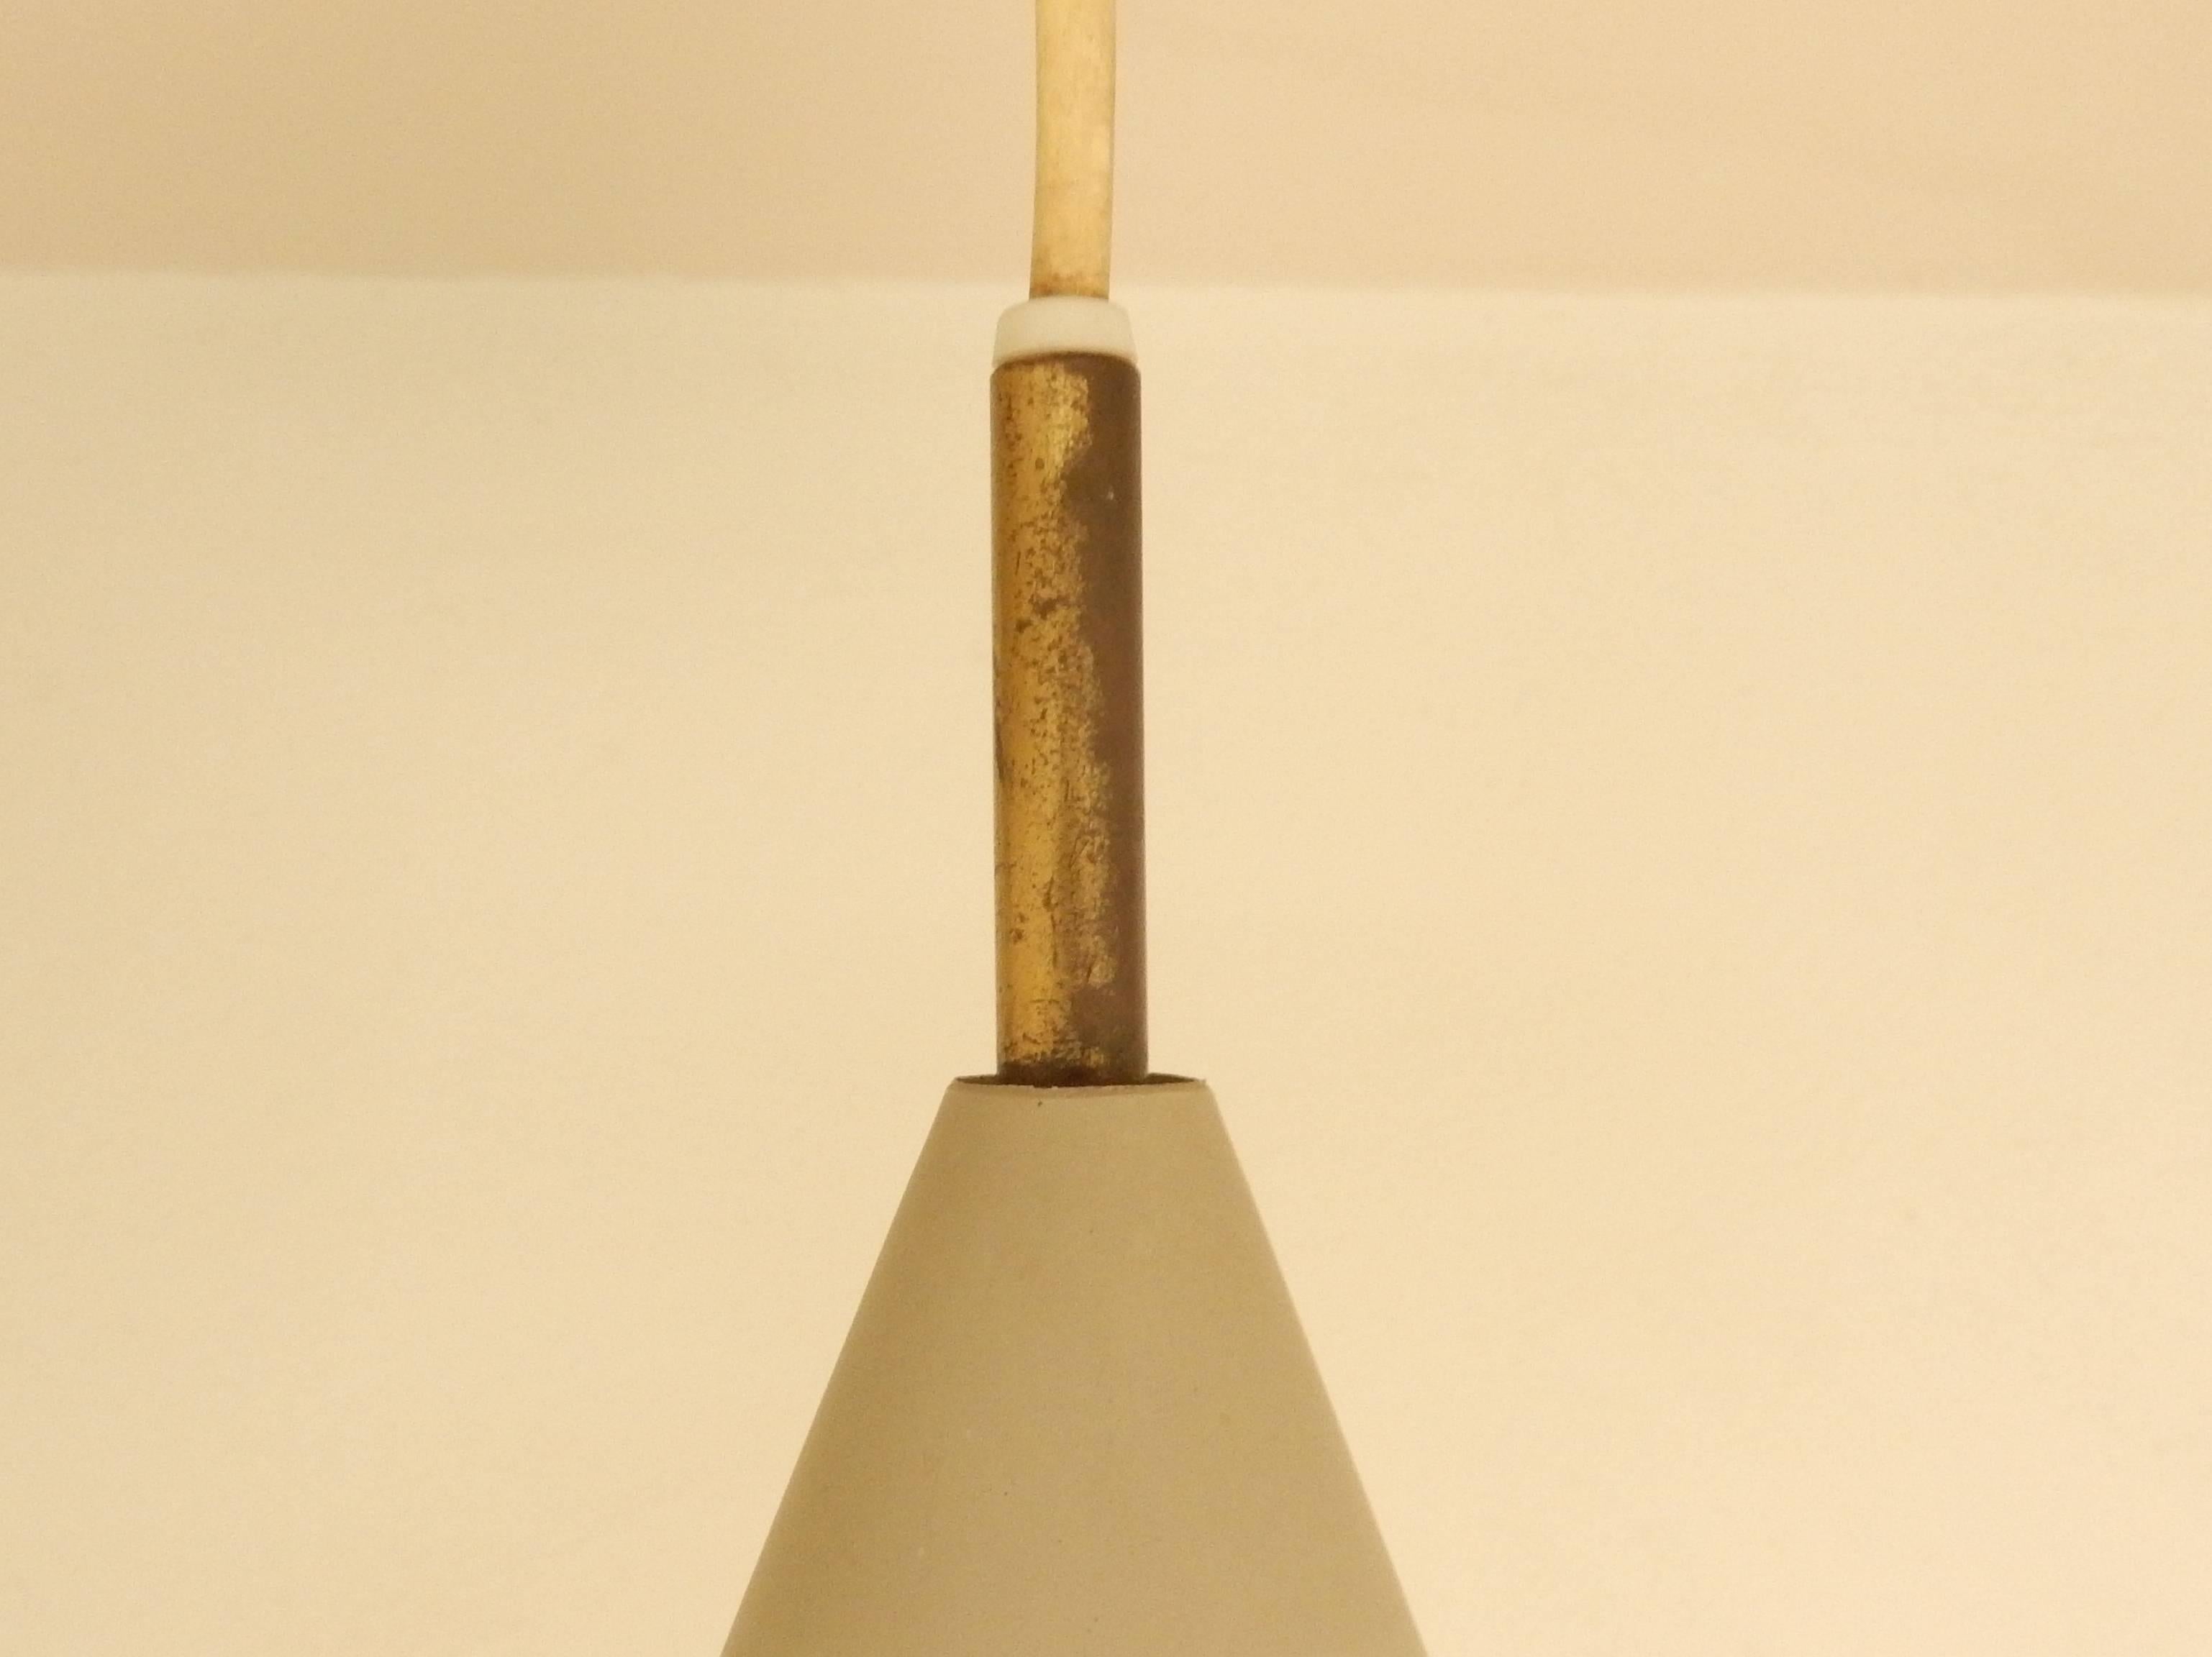 This lovely small pendant light is a design by Svend Aage Holm Sørensen for Lyfa from the 1950s. Only few models are known with these two cones. Usually the cones are separately carrying a bulb. With this model the two cones are on top of each